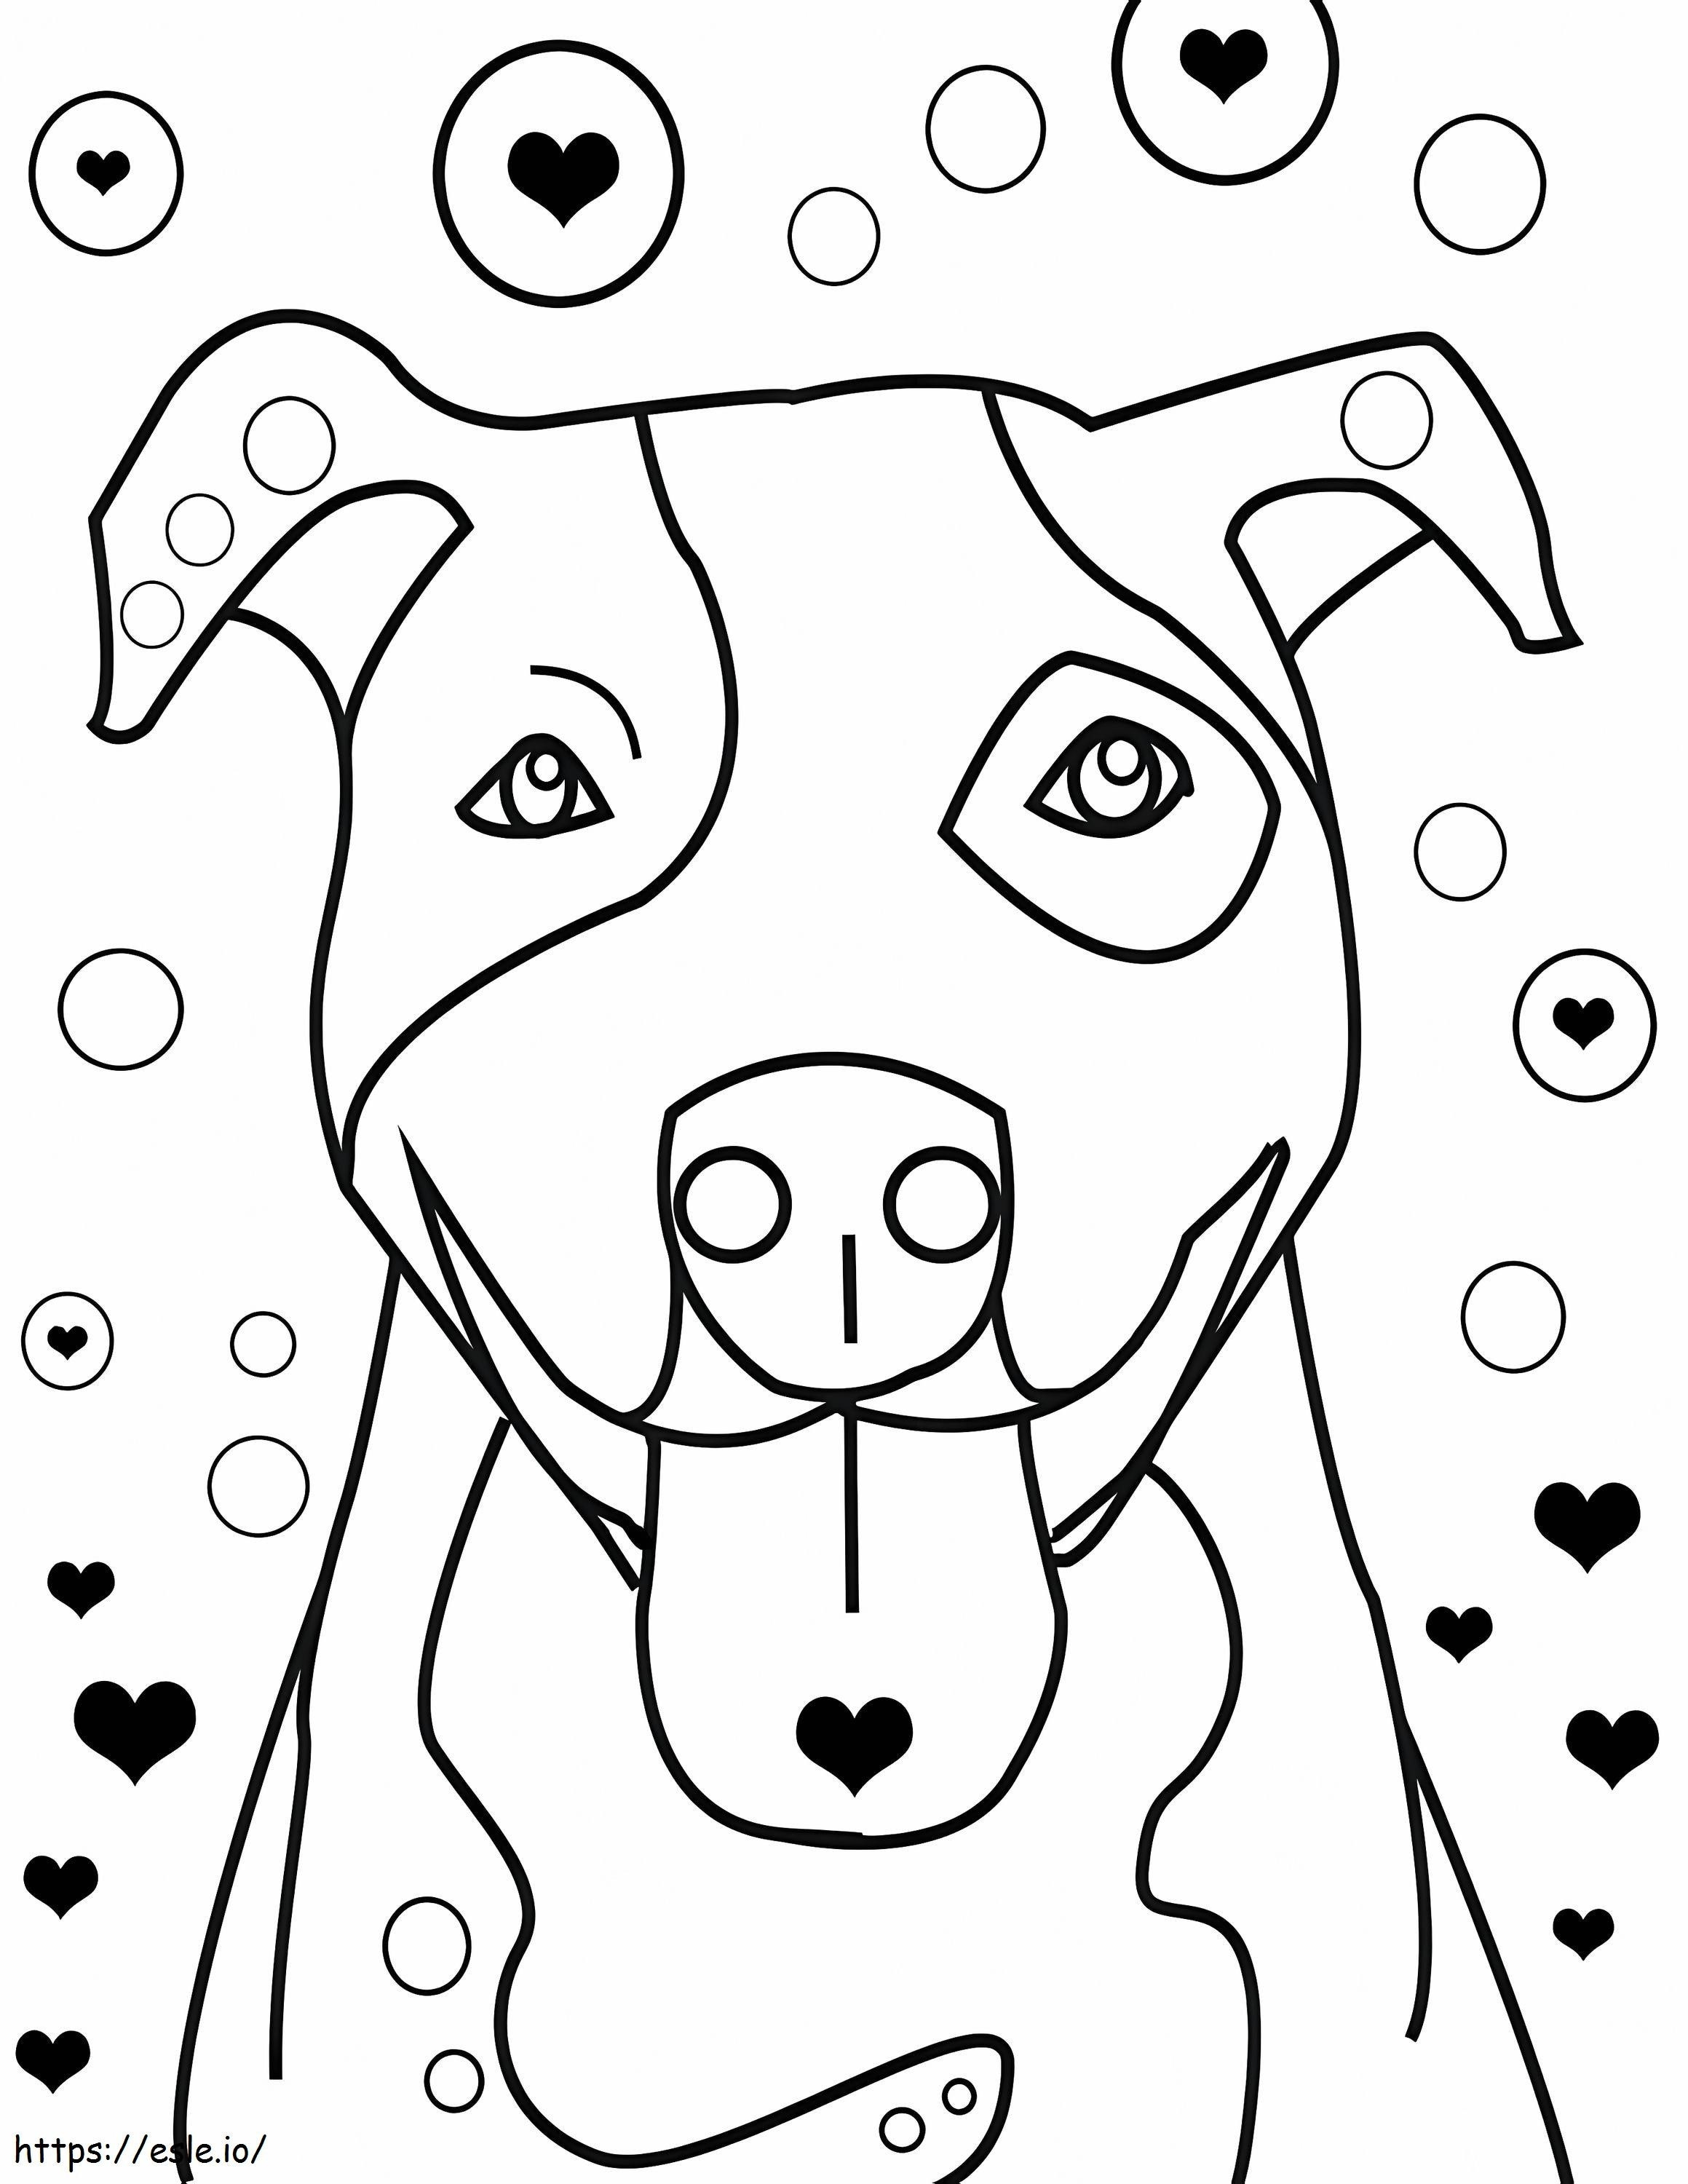 A Cute Pitbull coloring page